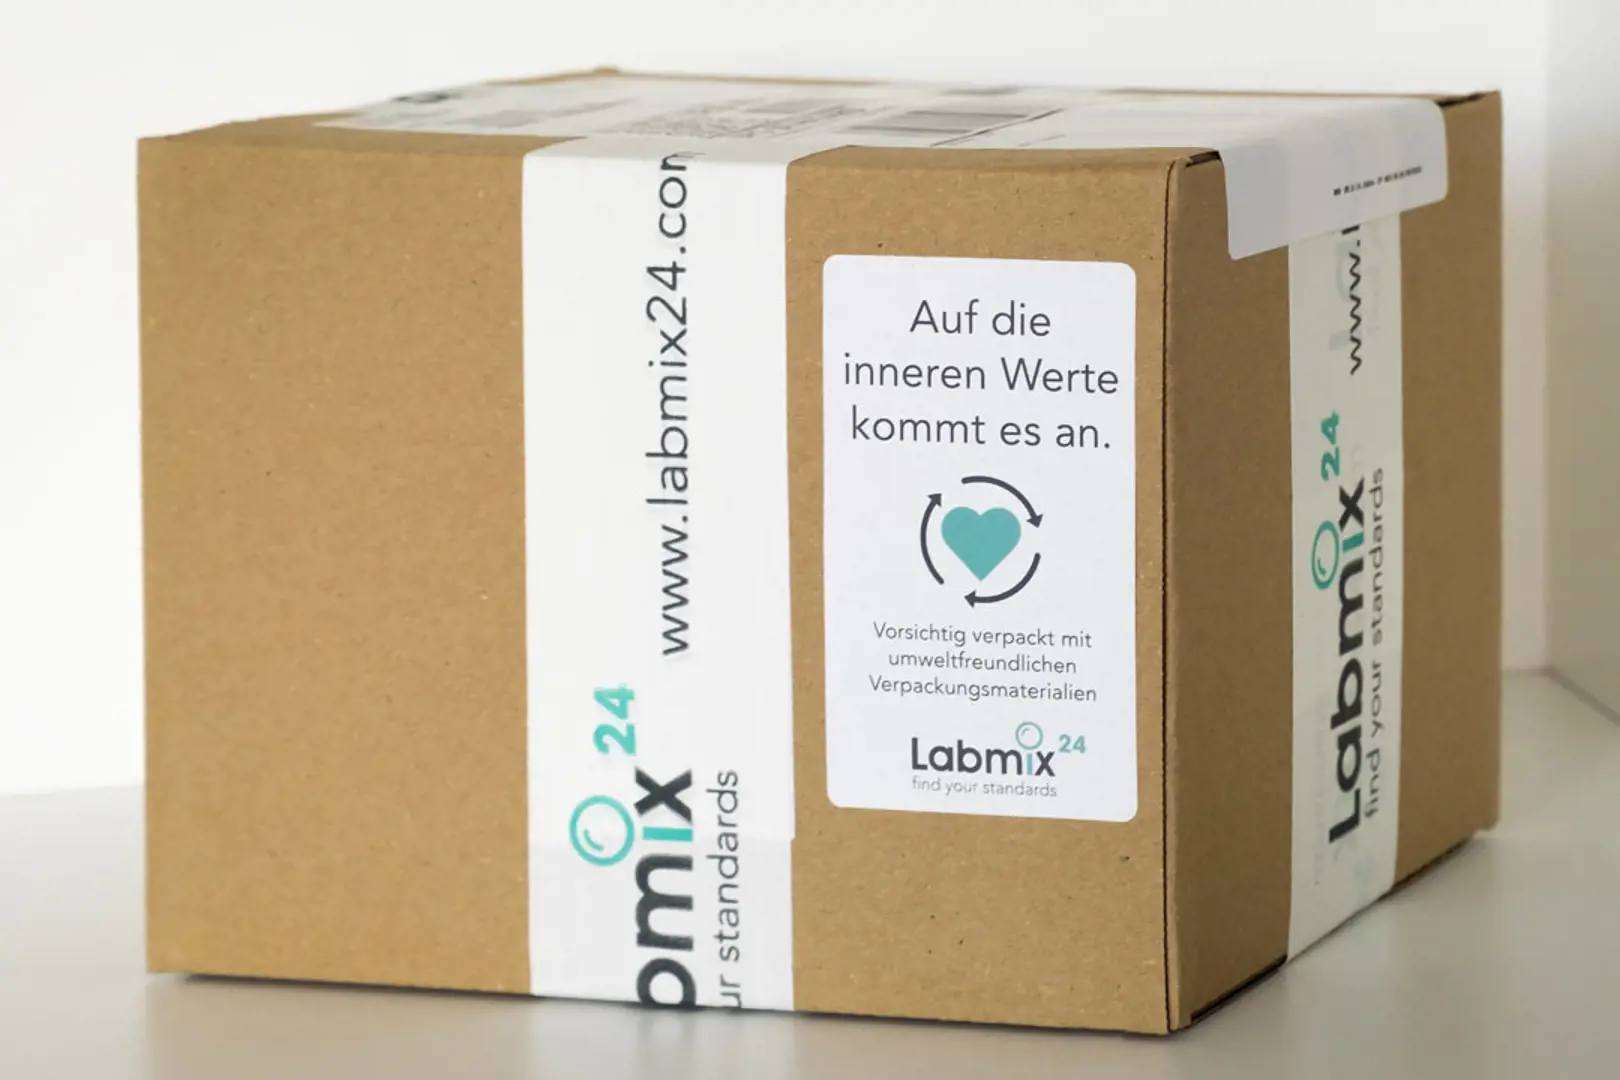 A Labmix24 package in sustainable packaging